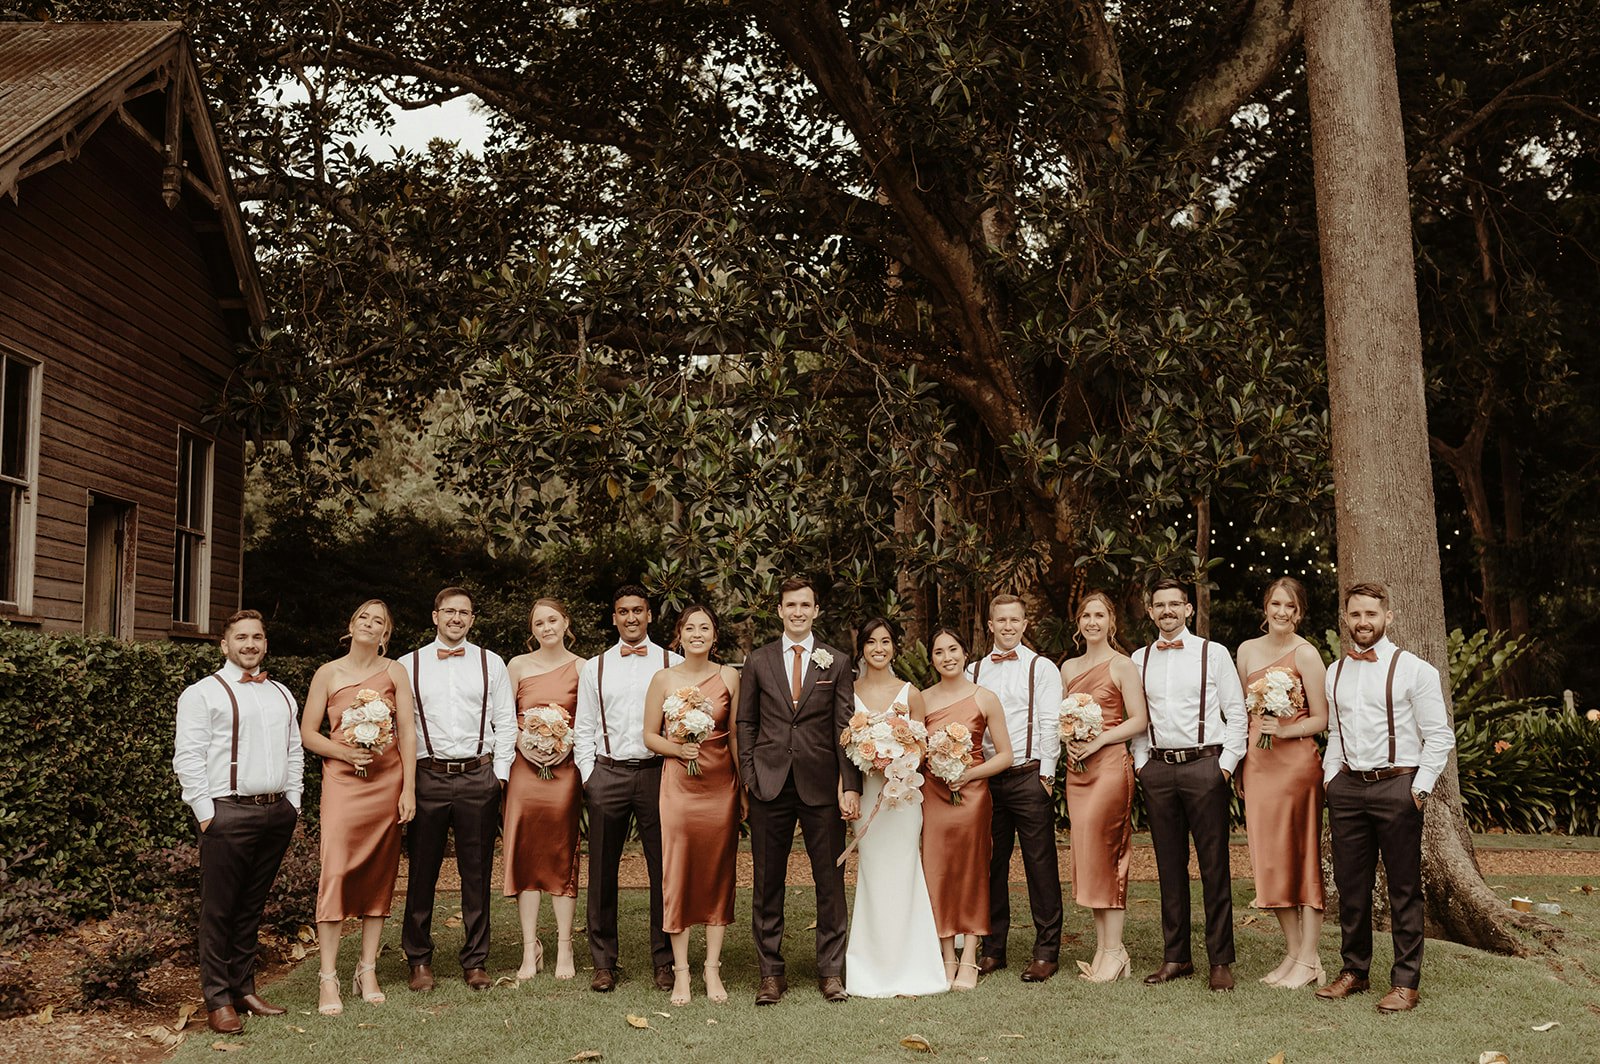 Wedding party in front of tree